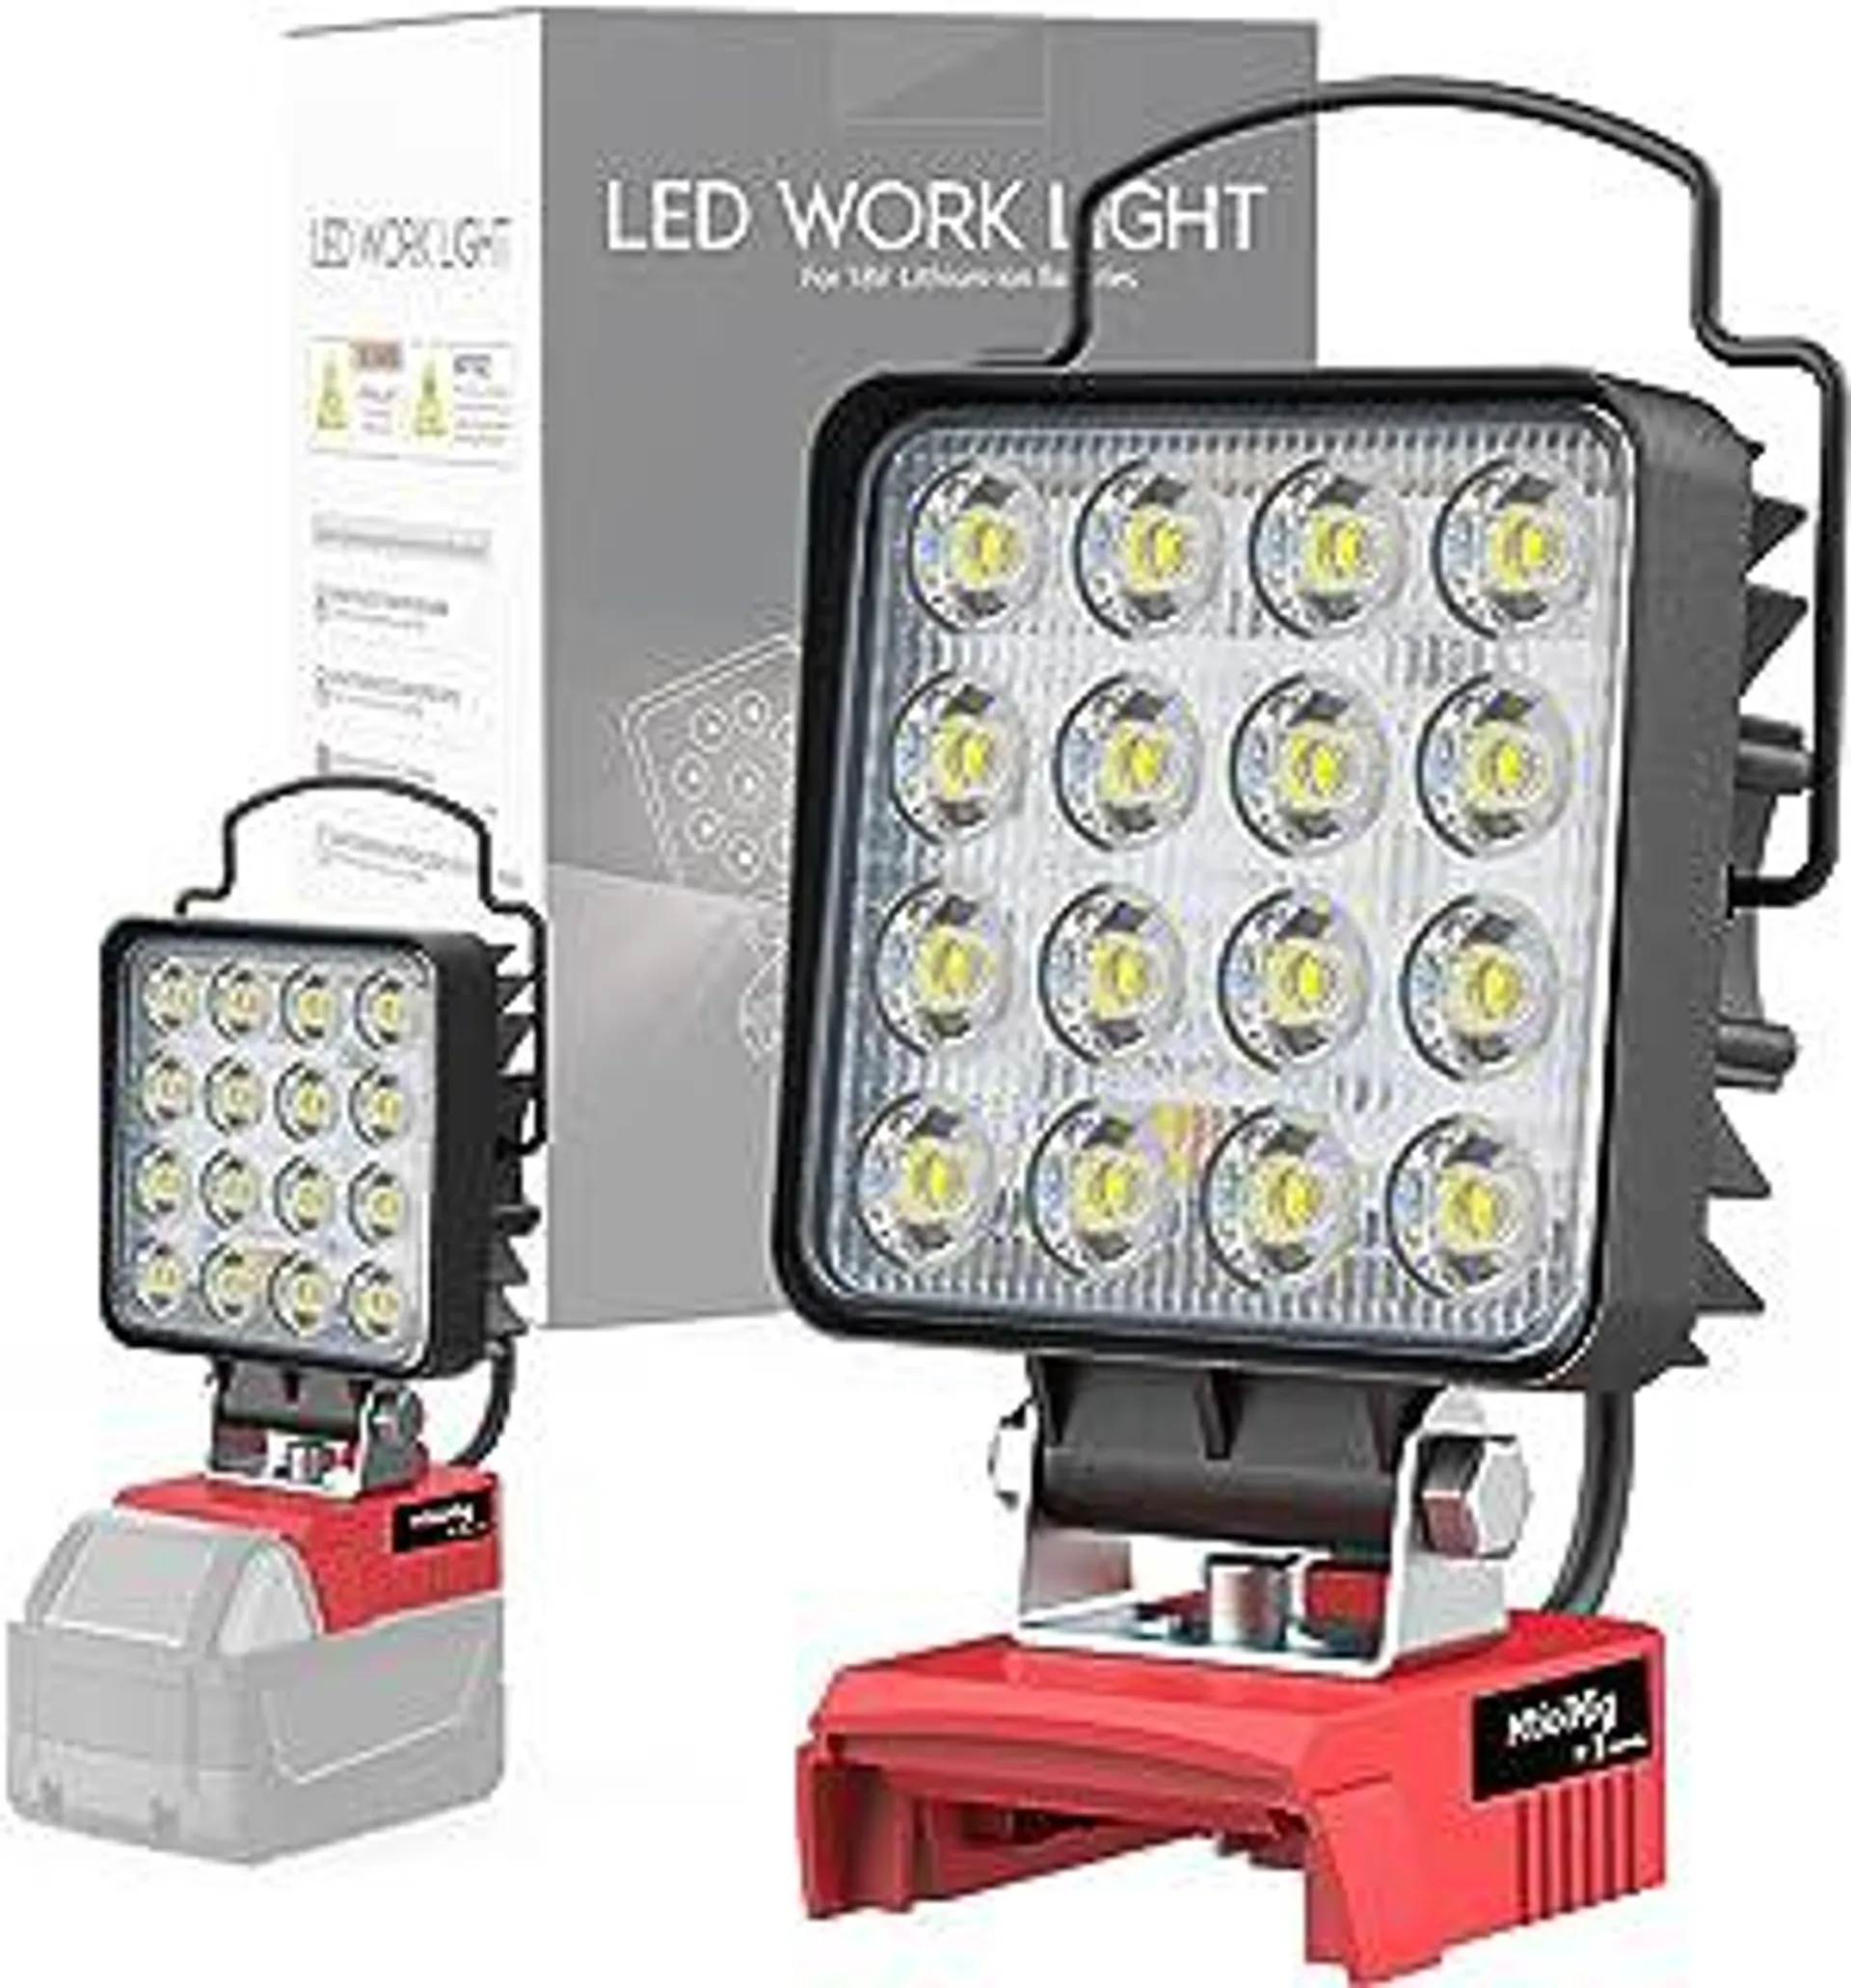 Cordless LED Work Light for Milwaukee 18v Battery, 48W 4800Lumens Battery Powered LED Flood Light for Milwaukee Tools Only with USB & Type-C Charging for Workshop,Garage,Camping, Outdoor, Emergencies